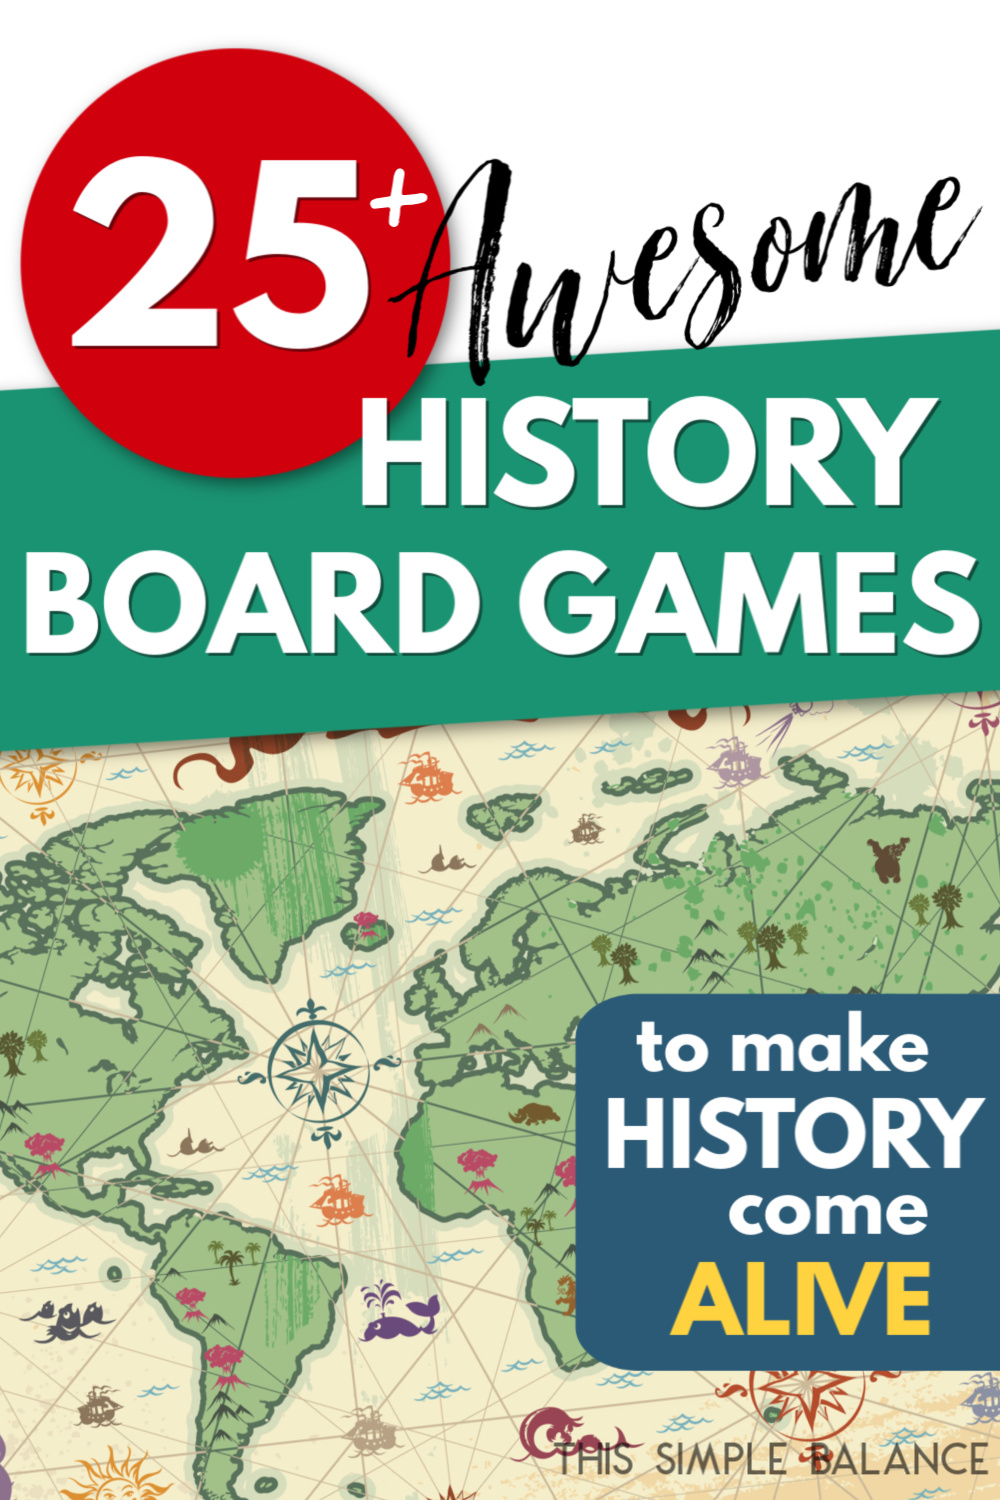 artistic world map with text overlay, "25+ awesome history board games to make history come alive"